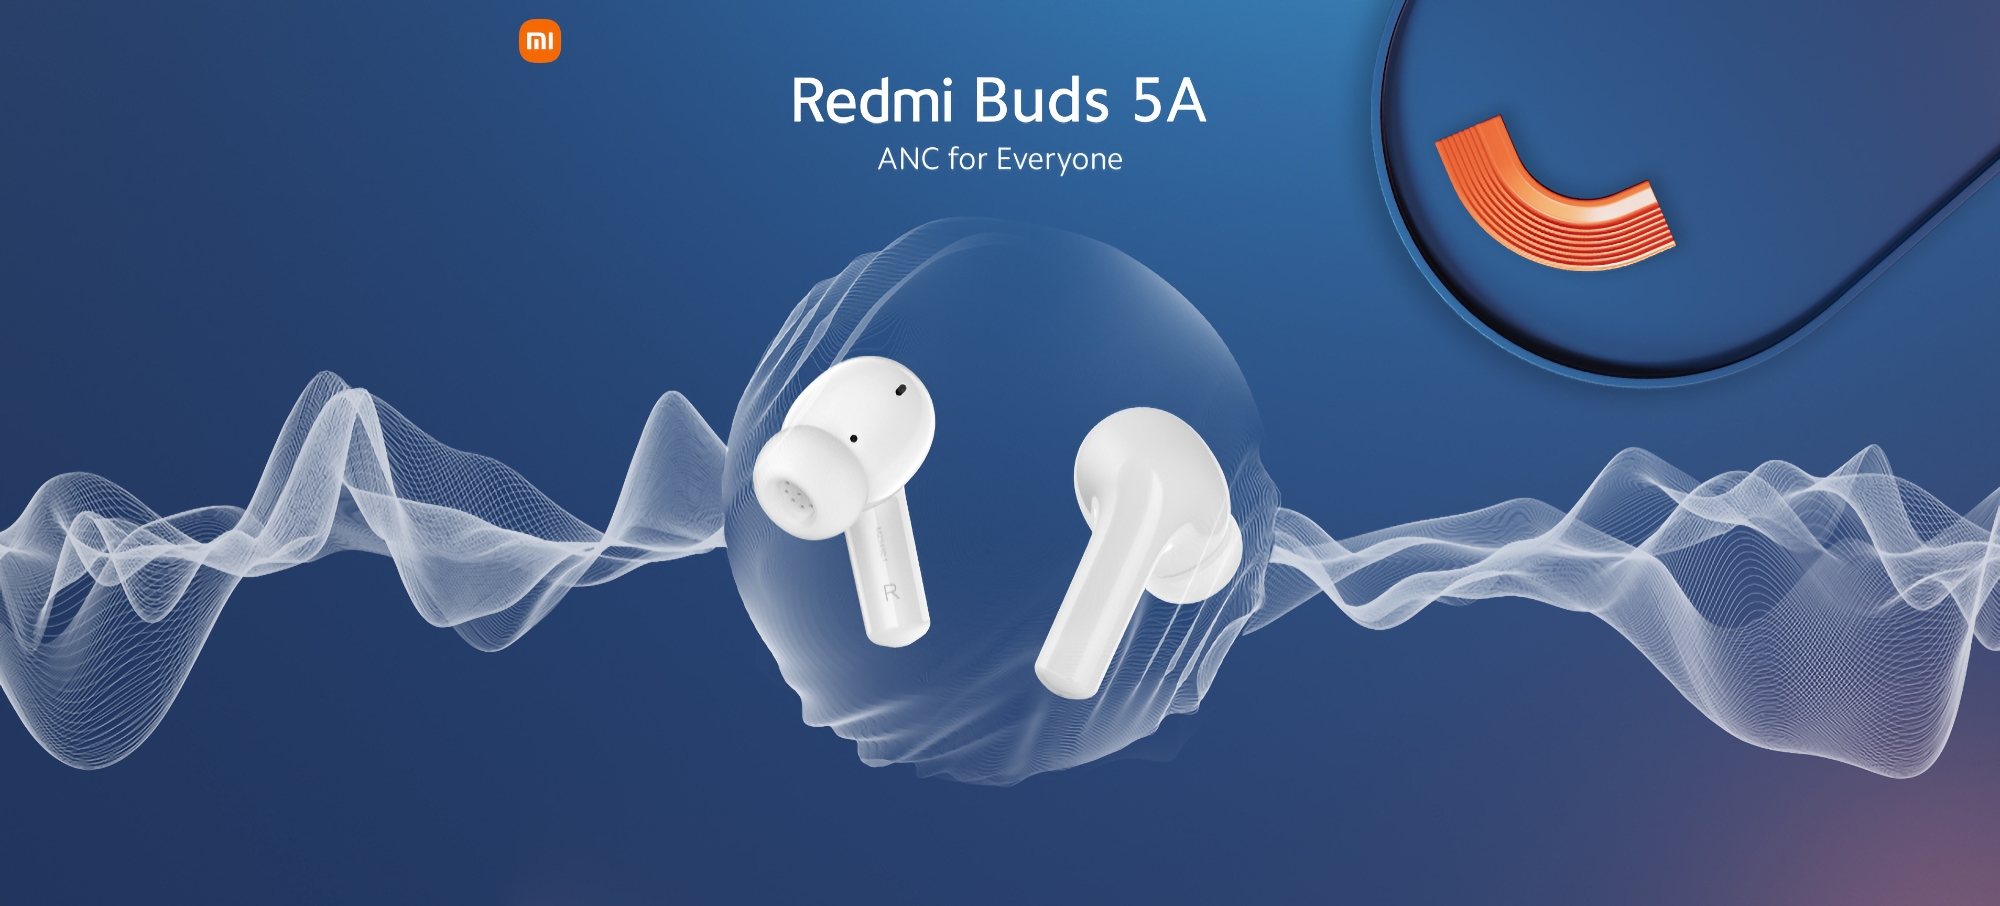 Xiaomi will unveil the budget Redmi Buds 5A headphones with ANC and Google Fast Pair feature on 23 April